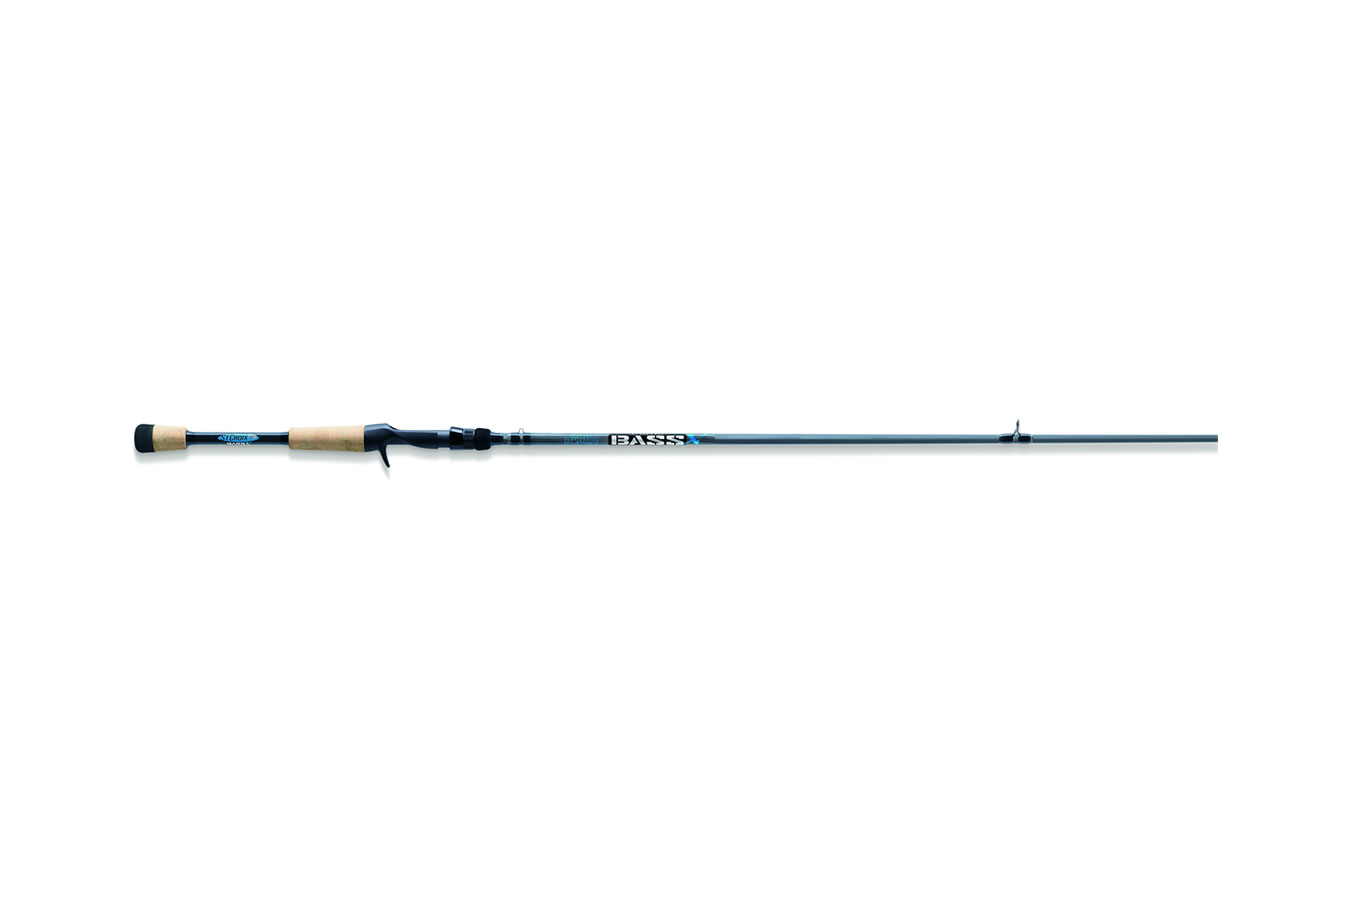 Discount St Croix Bass X 6 ft 8 in - Medium Casting Rod for Sale